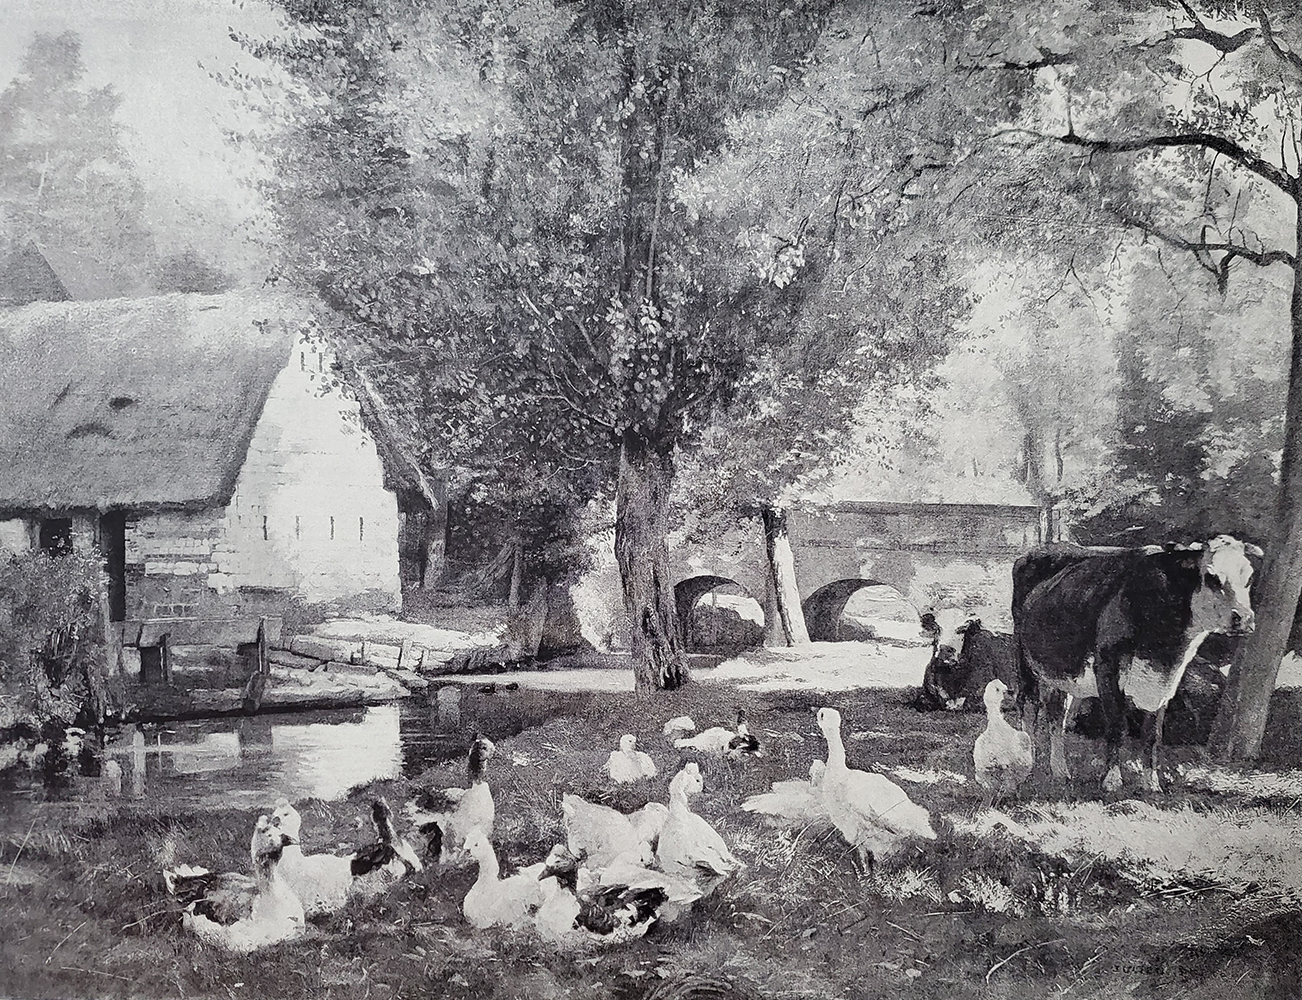 cows and ducks by the river